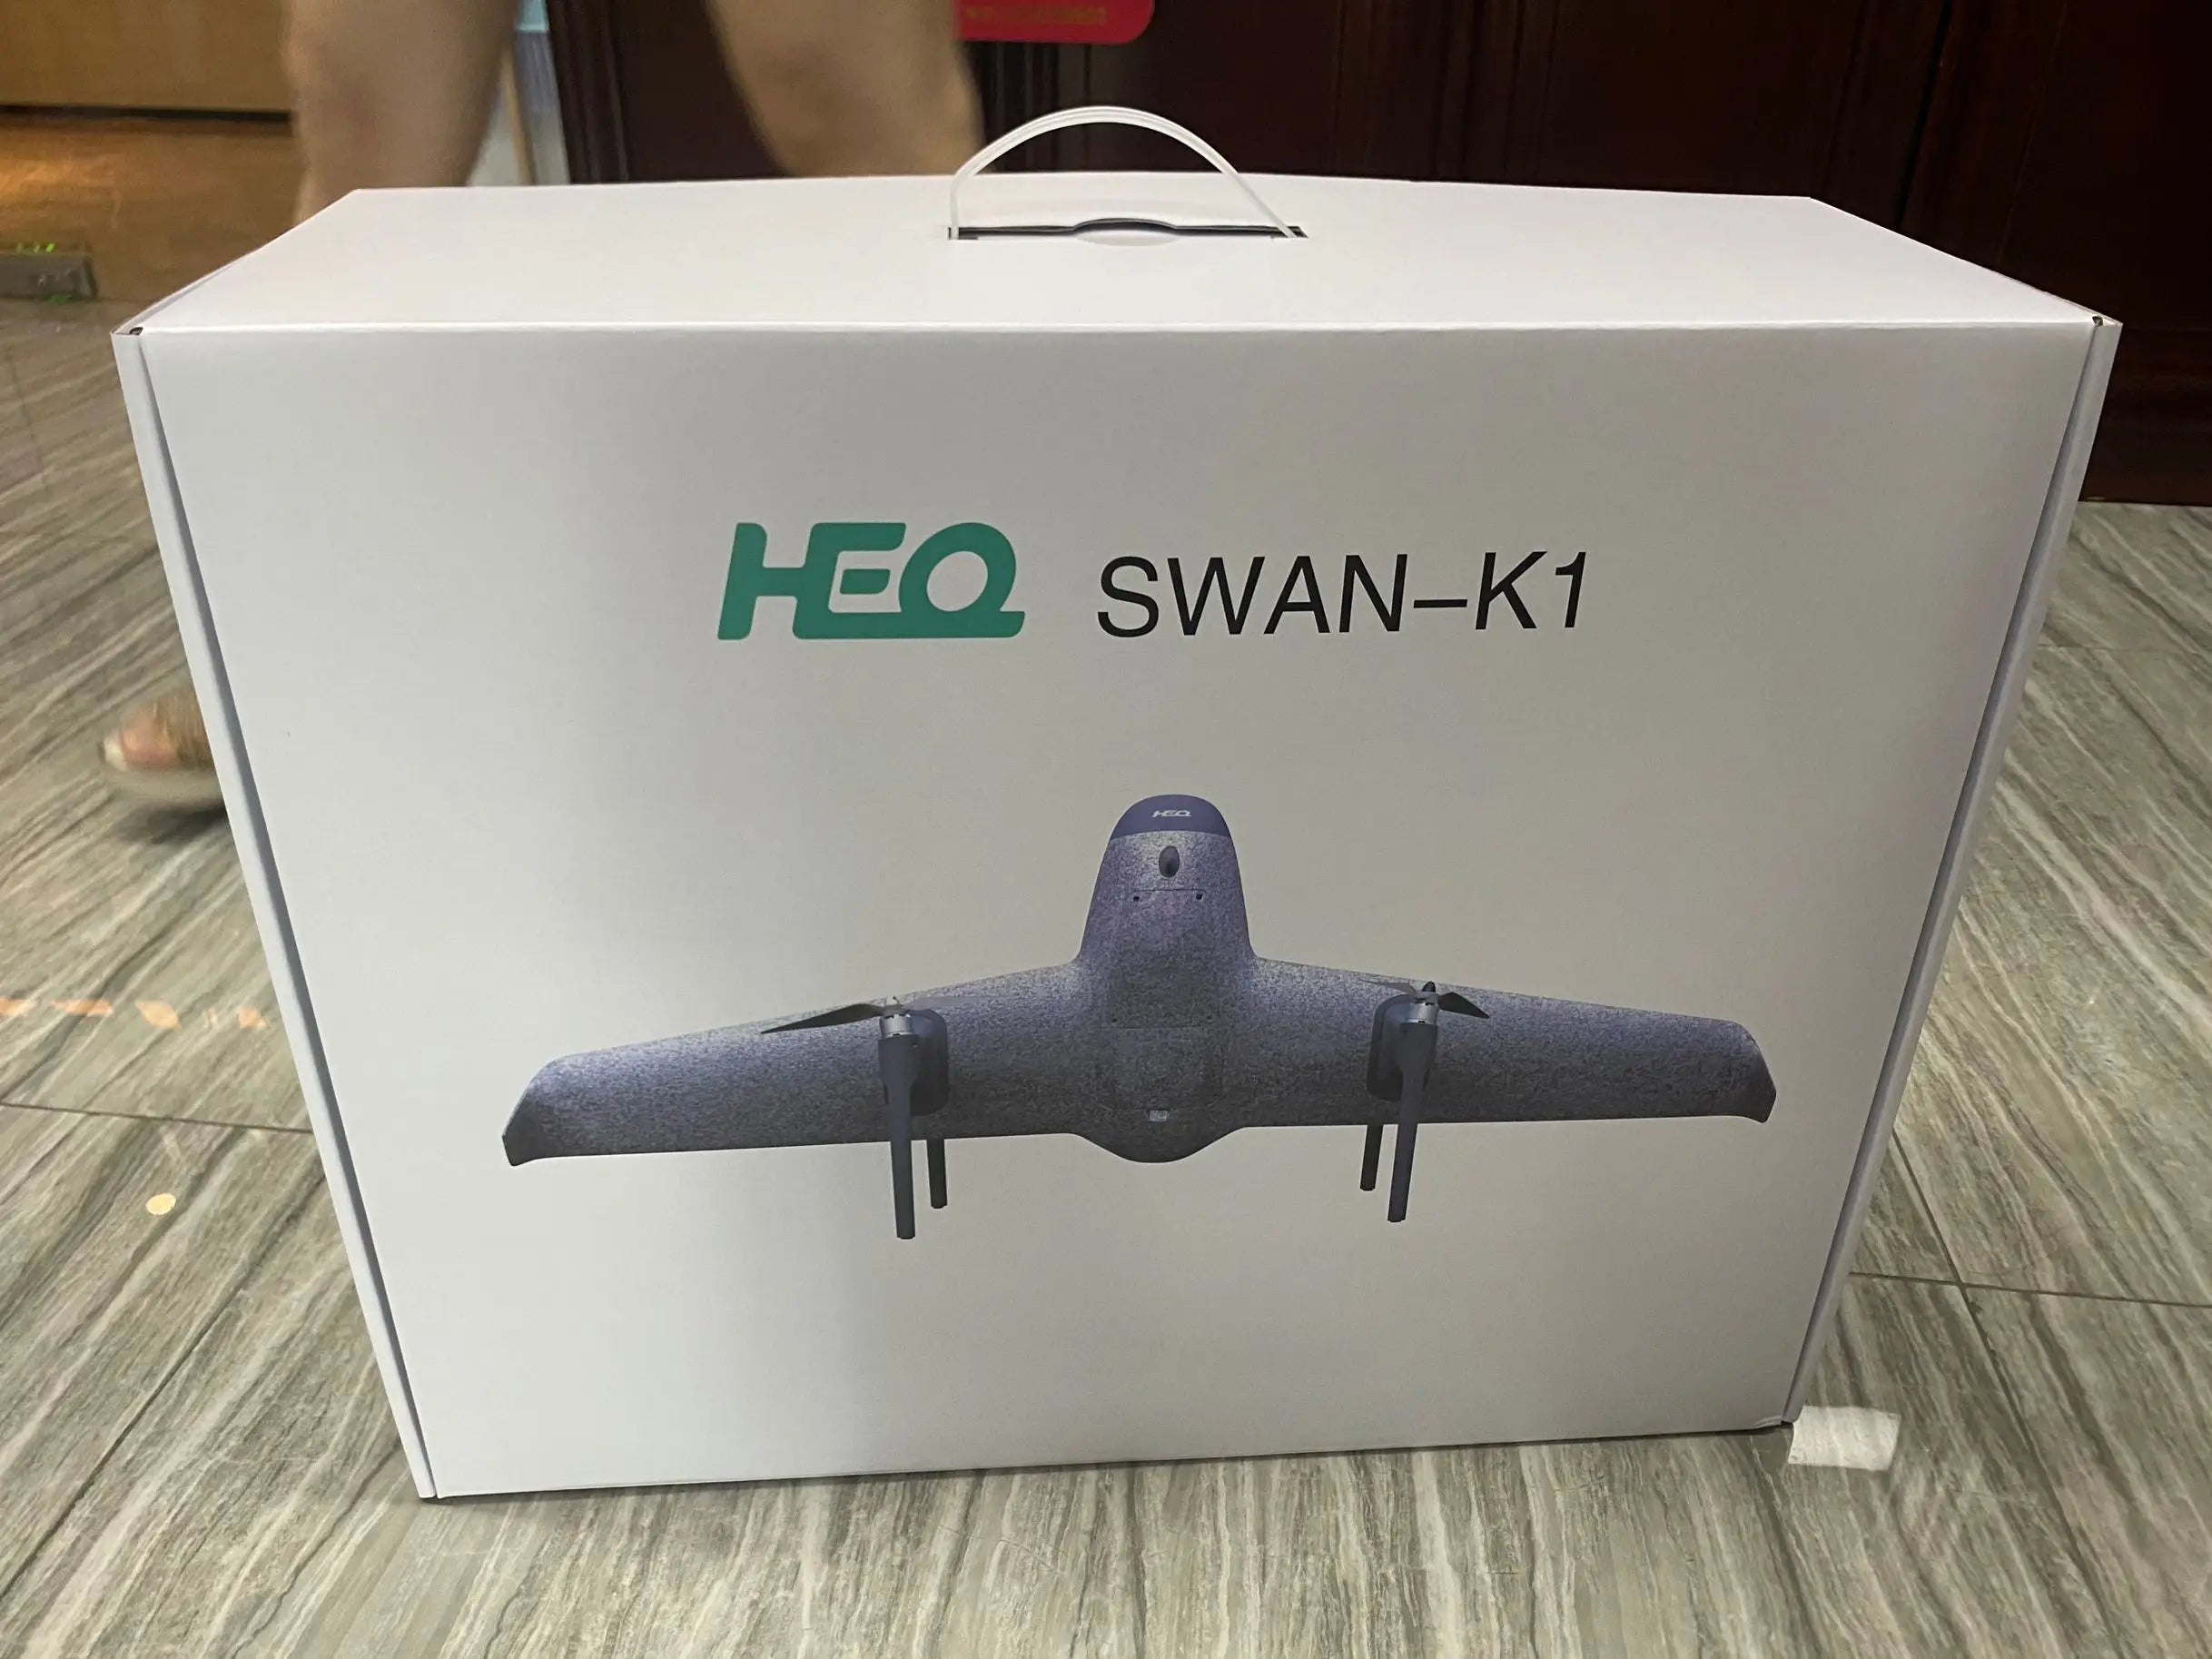 Swan K1 PRO VTOL Fixed Wing Drone, advanced features in a compact form factor . up your game offers power and portability to